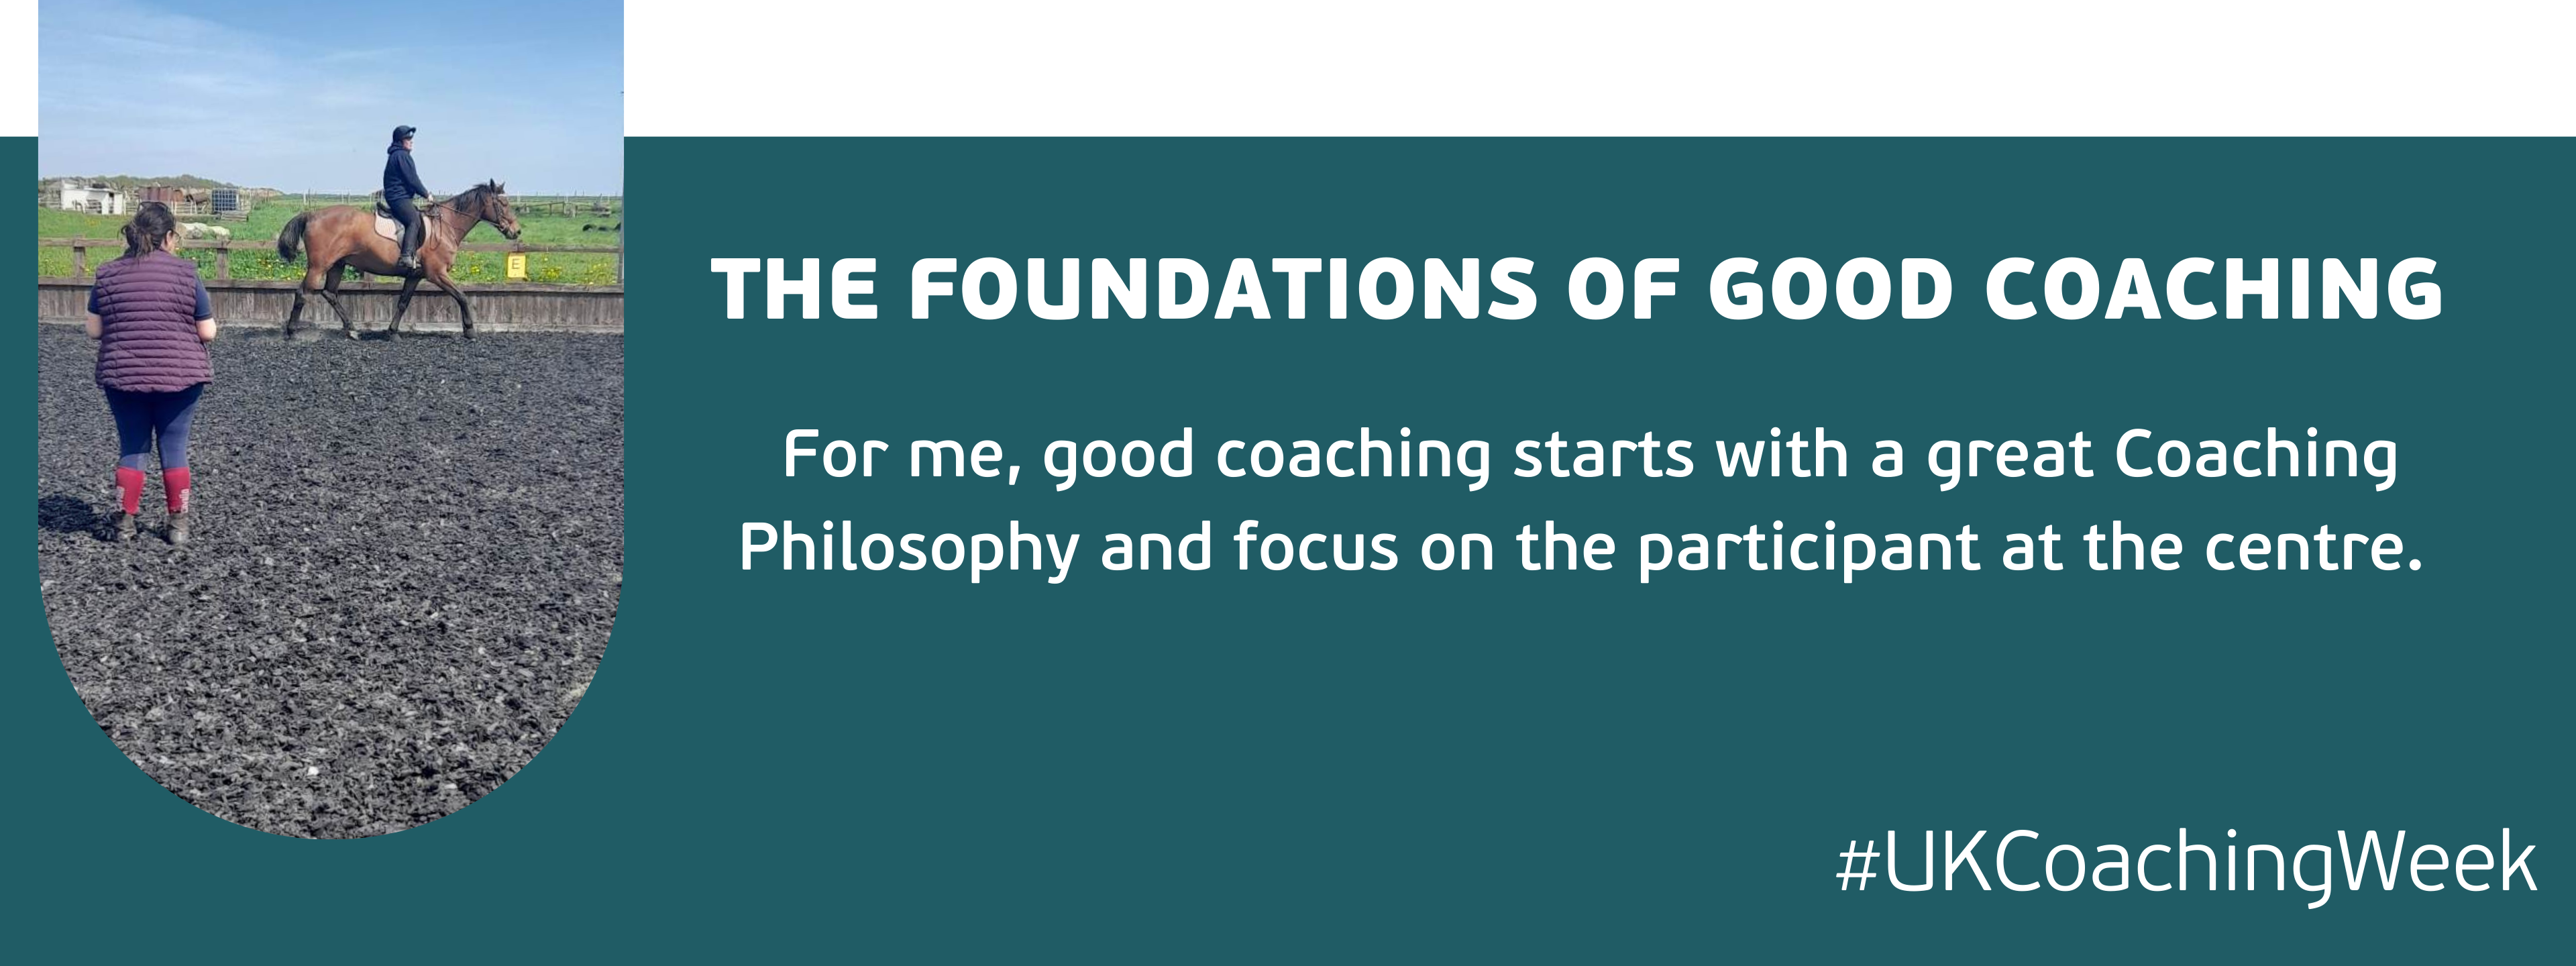 Banner with a teal background, overlaying is the title "The foundations of good coaching" and underneath is "For me, good coaching starts with a great Coaching Philosophy and focus on the participant at the centre." On the left is a picture of Mel coaching.